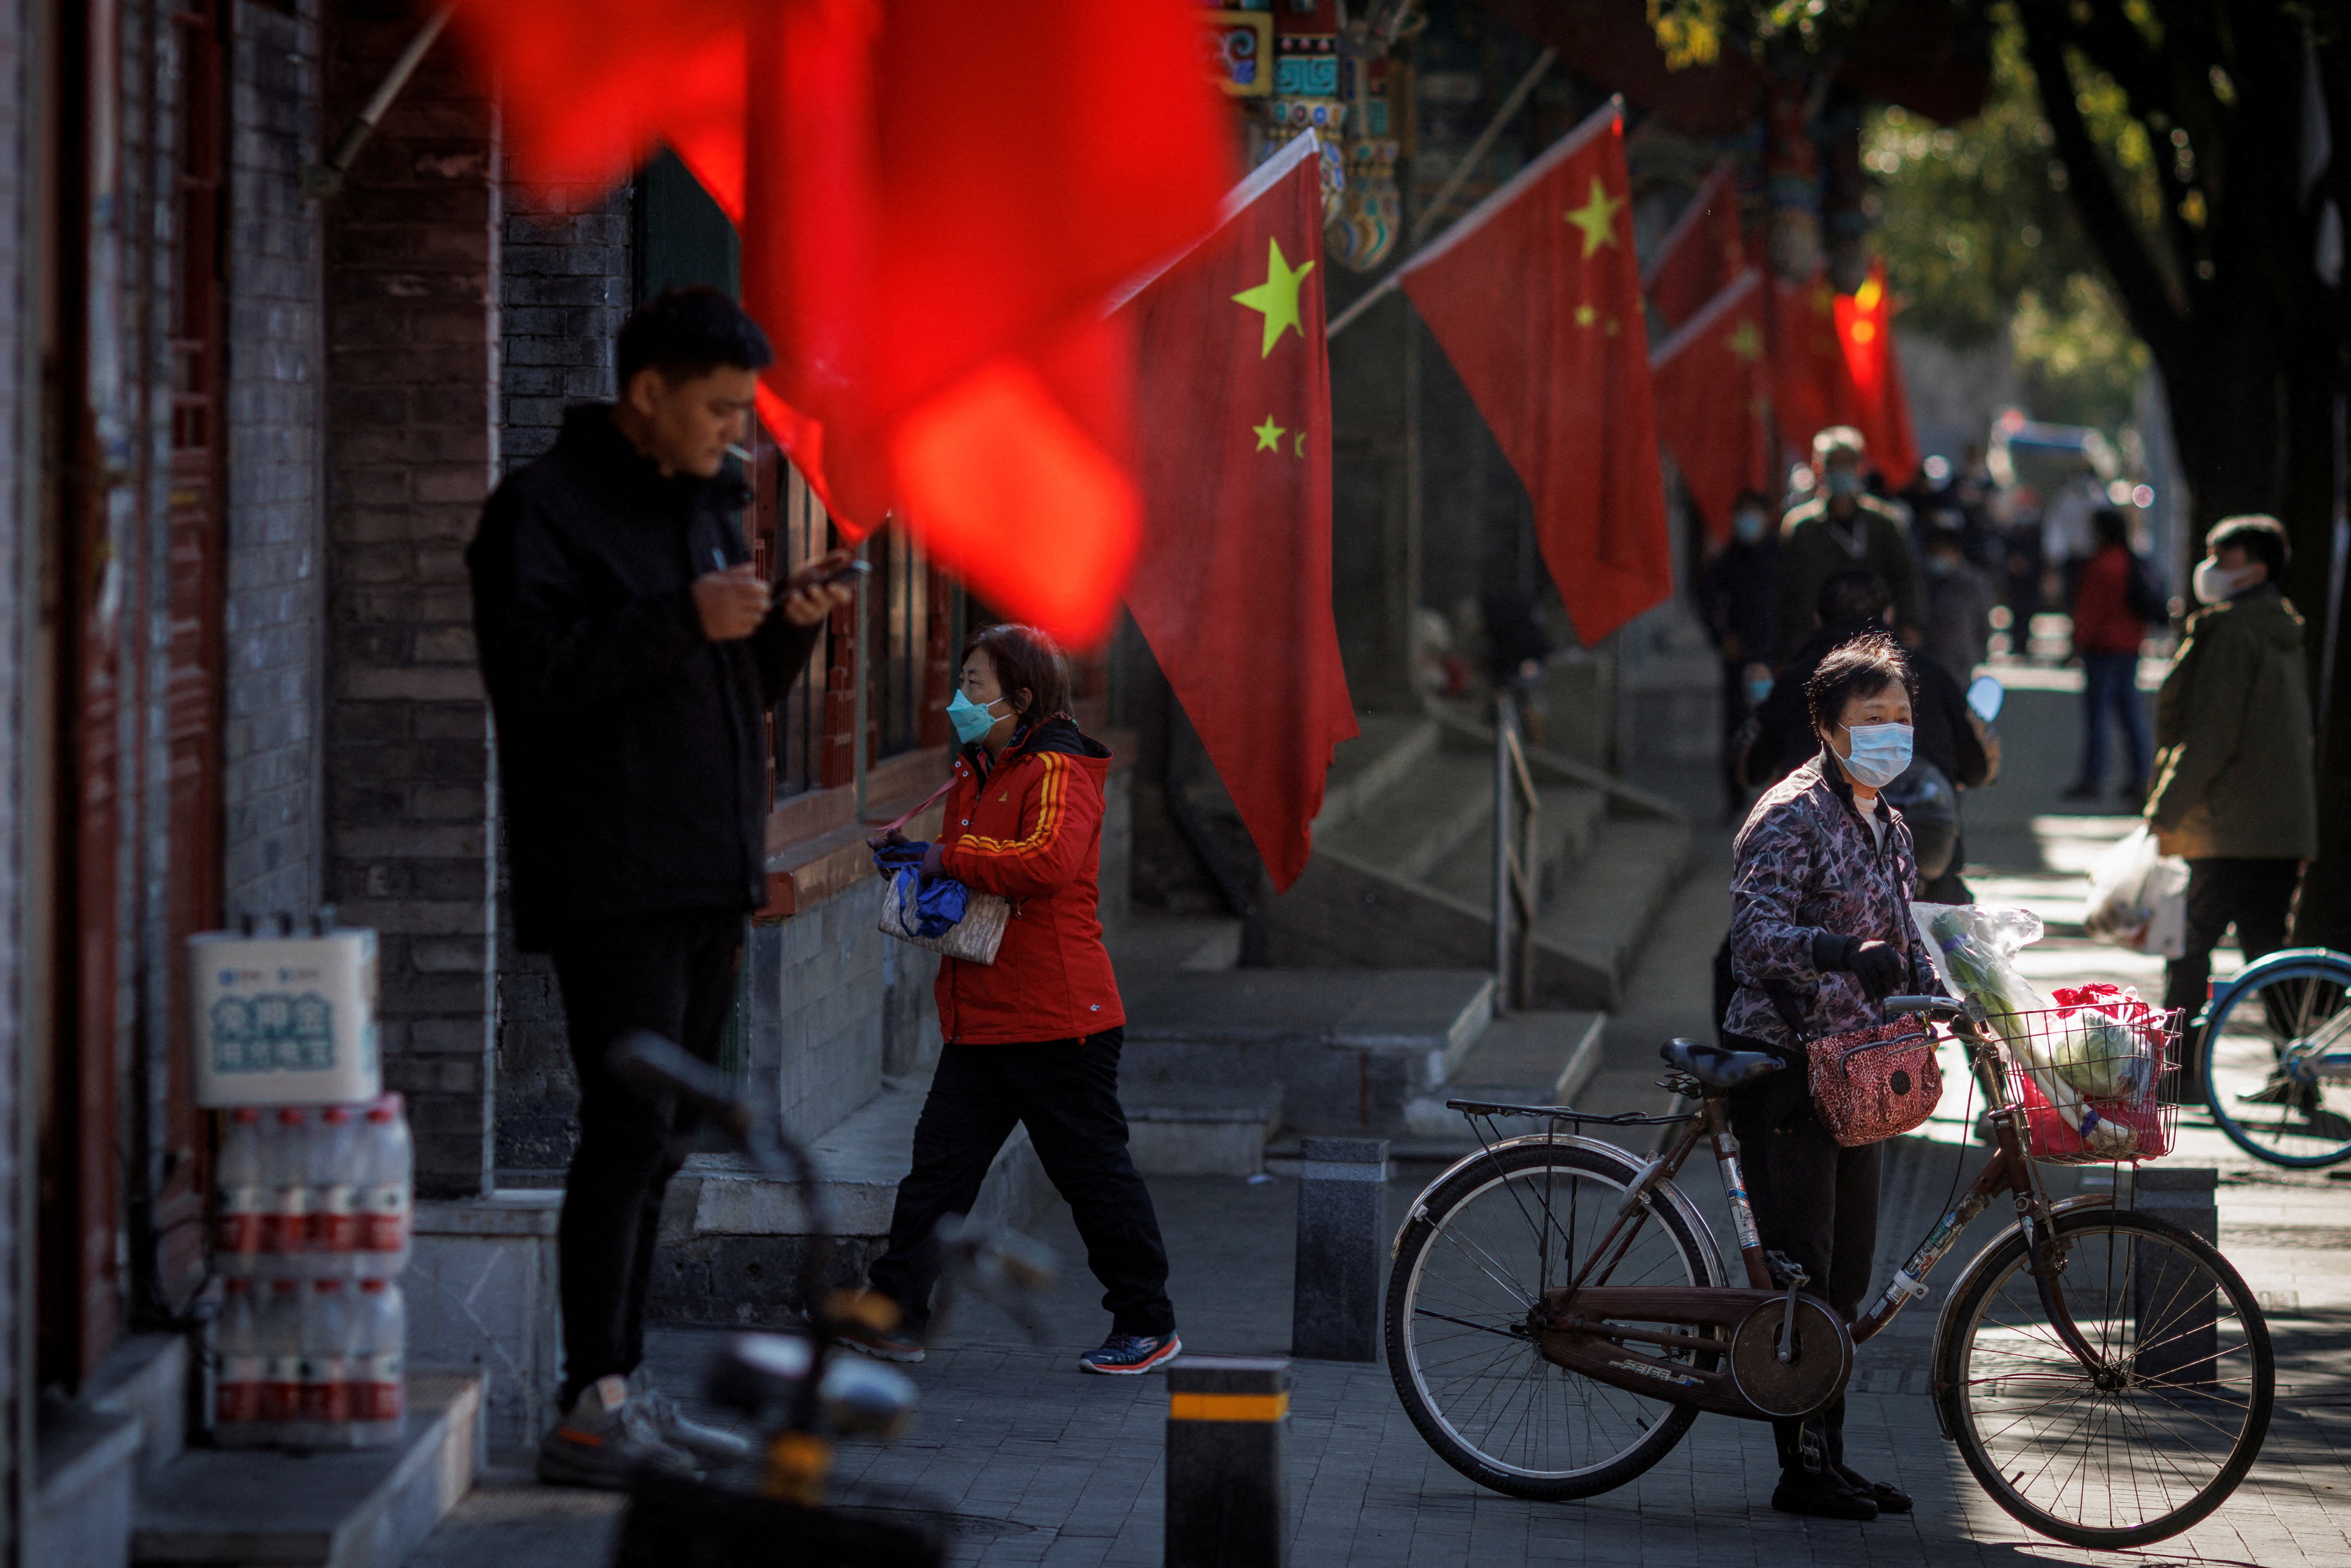 Beijing prepares for the 20th National Congress of the Communist Party of China